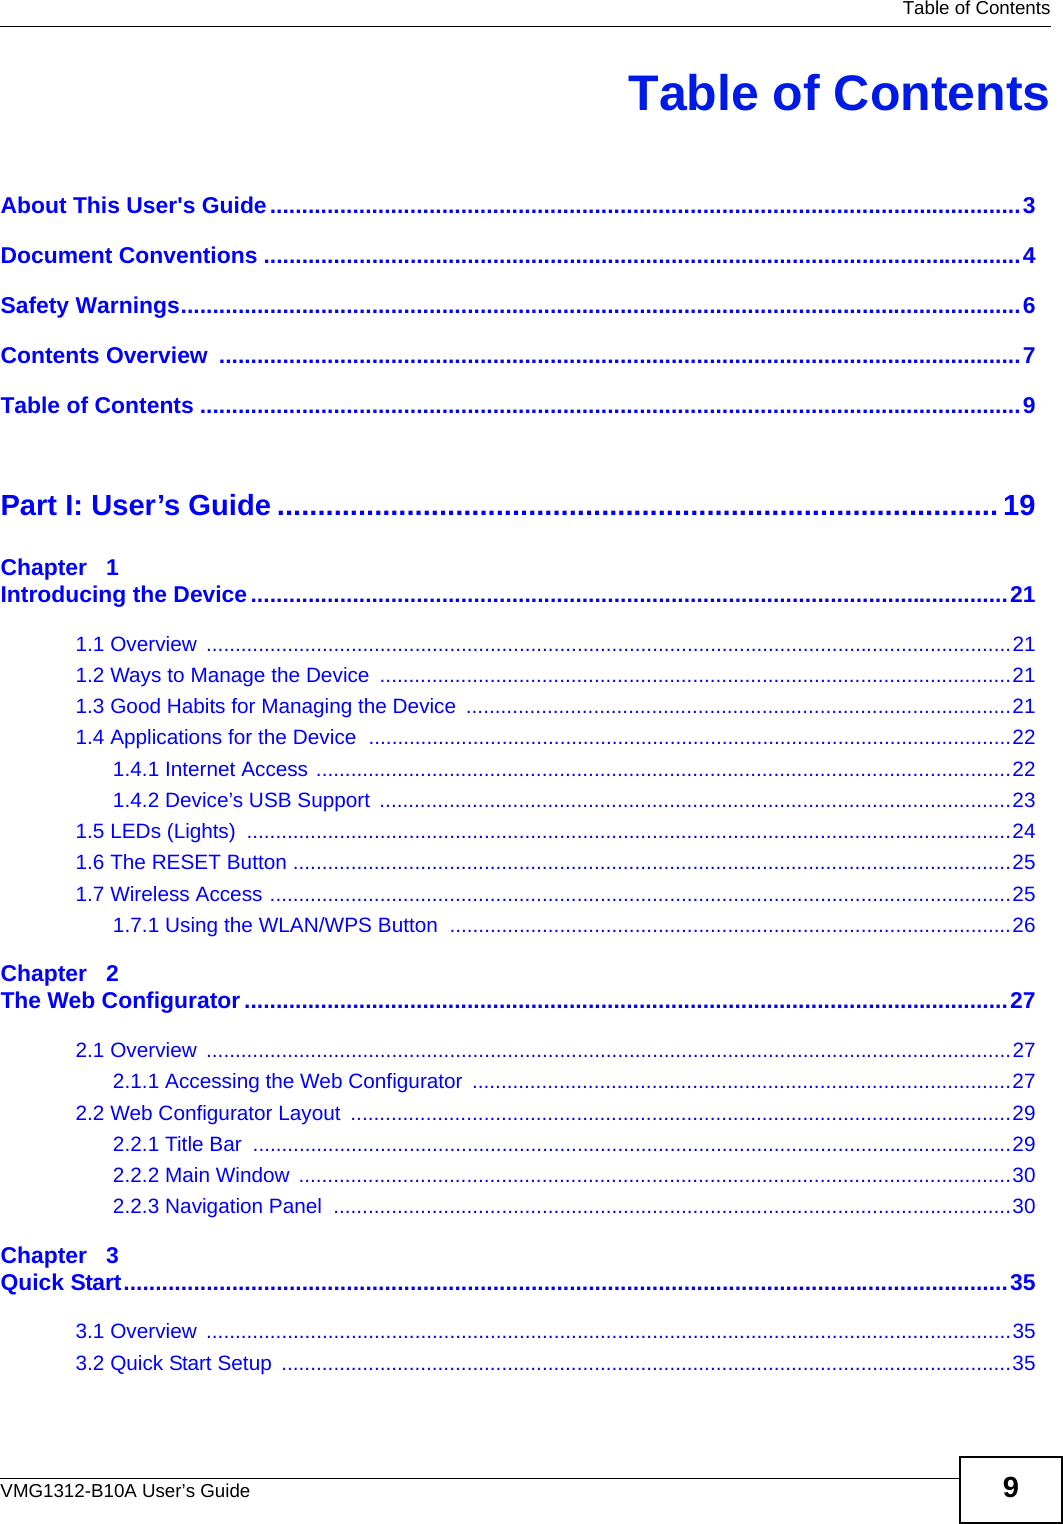   Table of ContentsVMG1312-B10A User’s Guide 9Table of ContentsAbout This User&apos;s Guide......................................................................................................................3Document Conventions .......................................................................................................................4Safety Warnings....................................................................................................................................6Contents Overview  ..............................................................................................................................7Table of Contents .................................................................................................................................9Part I: User’s Guide ......................................................................................... 19Chapter   1Introducing the Device.......................................................................................................................211.1 Overview  ...........................................................................................................................................211.2 Ways to Manage the Device  .............................................................................................................211.3 Good Habits for Managing the Device  ..............................................................................................211.4 Applications for the Device  ...............................................................................................................221.4.1 Internet Access ........................................................................................................................221.4.2 Device’s USB Support  .............................................................................................................231.5 LEDs (Lights)  ....................................................................................................................................241.6 The RESET Button ............................................................................................................................251.7 Wireless Access ................................................................................................................................251.7.1 Using the WLAN/WPS Button  .................................................................................................26Chapter   2The Web Configurator........................................................................................................................272.1 Overview  ...........................................................................................................................................272.1.1 Accessing the Web Configurator  .............................................................................................272.2 Web Configurator Layout  ..................................................................................................................292.2.1 Title Bar  ...................................................................................................................................292.2.2 Main Window  ...........................................................................................................................302.2.3 Navigation Panel  .....................................................................................................................30Chapter   3Quick Start...........................................................................................................................................353.1 Overview  ...........................................................................................................................................353.2 Quick Start Setup  ..............................................................................................................................35